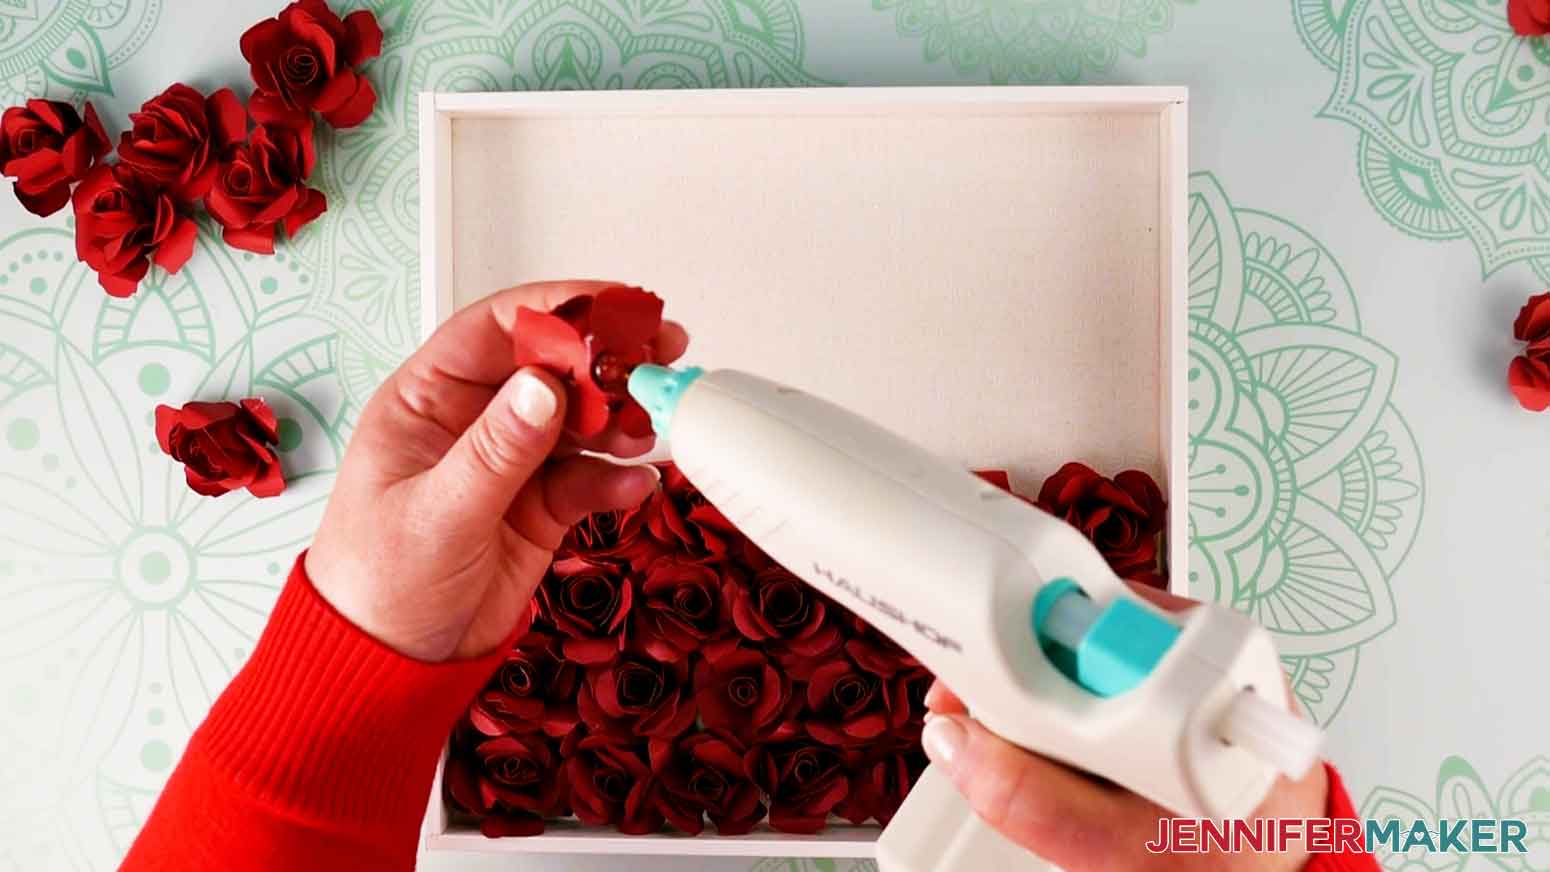 Continue gluing the paper flowers to the shadow box